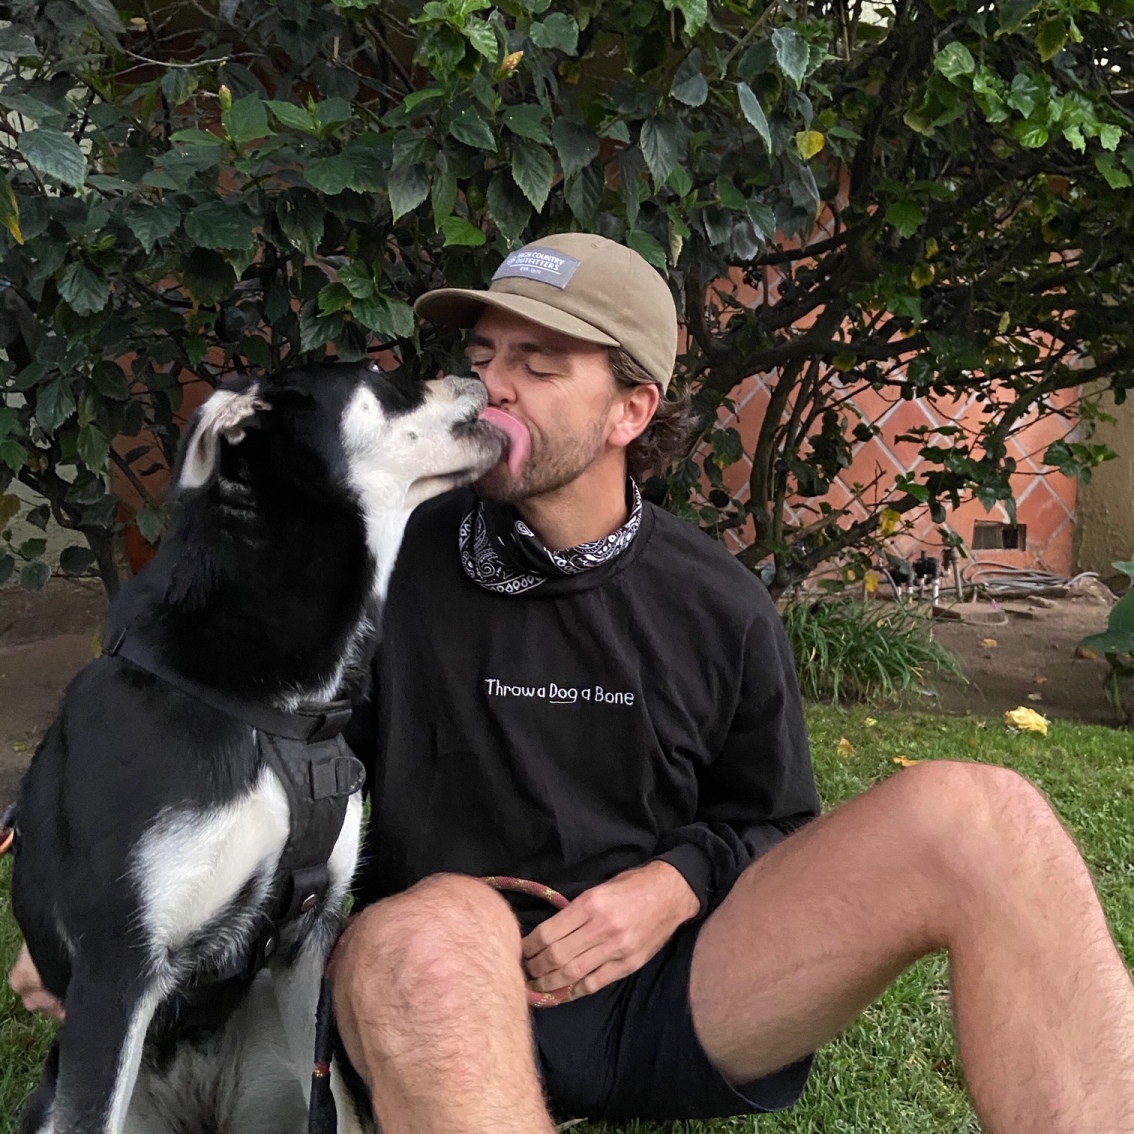 A man wearing a black sweatshirt embroidered with the phrase 'Throw a dog a bone' is licked by a black and white dog